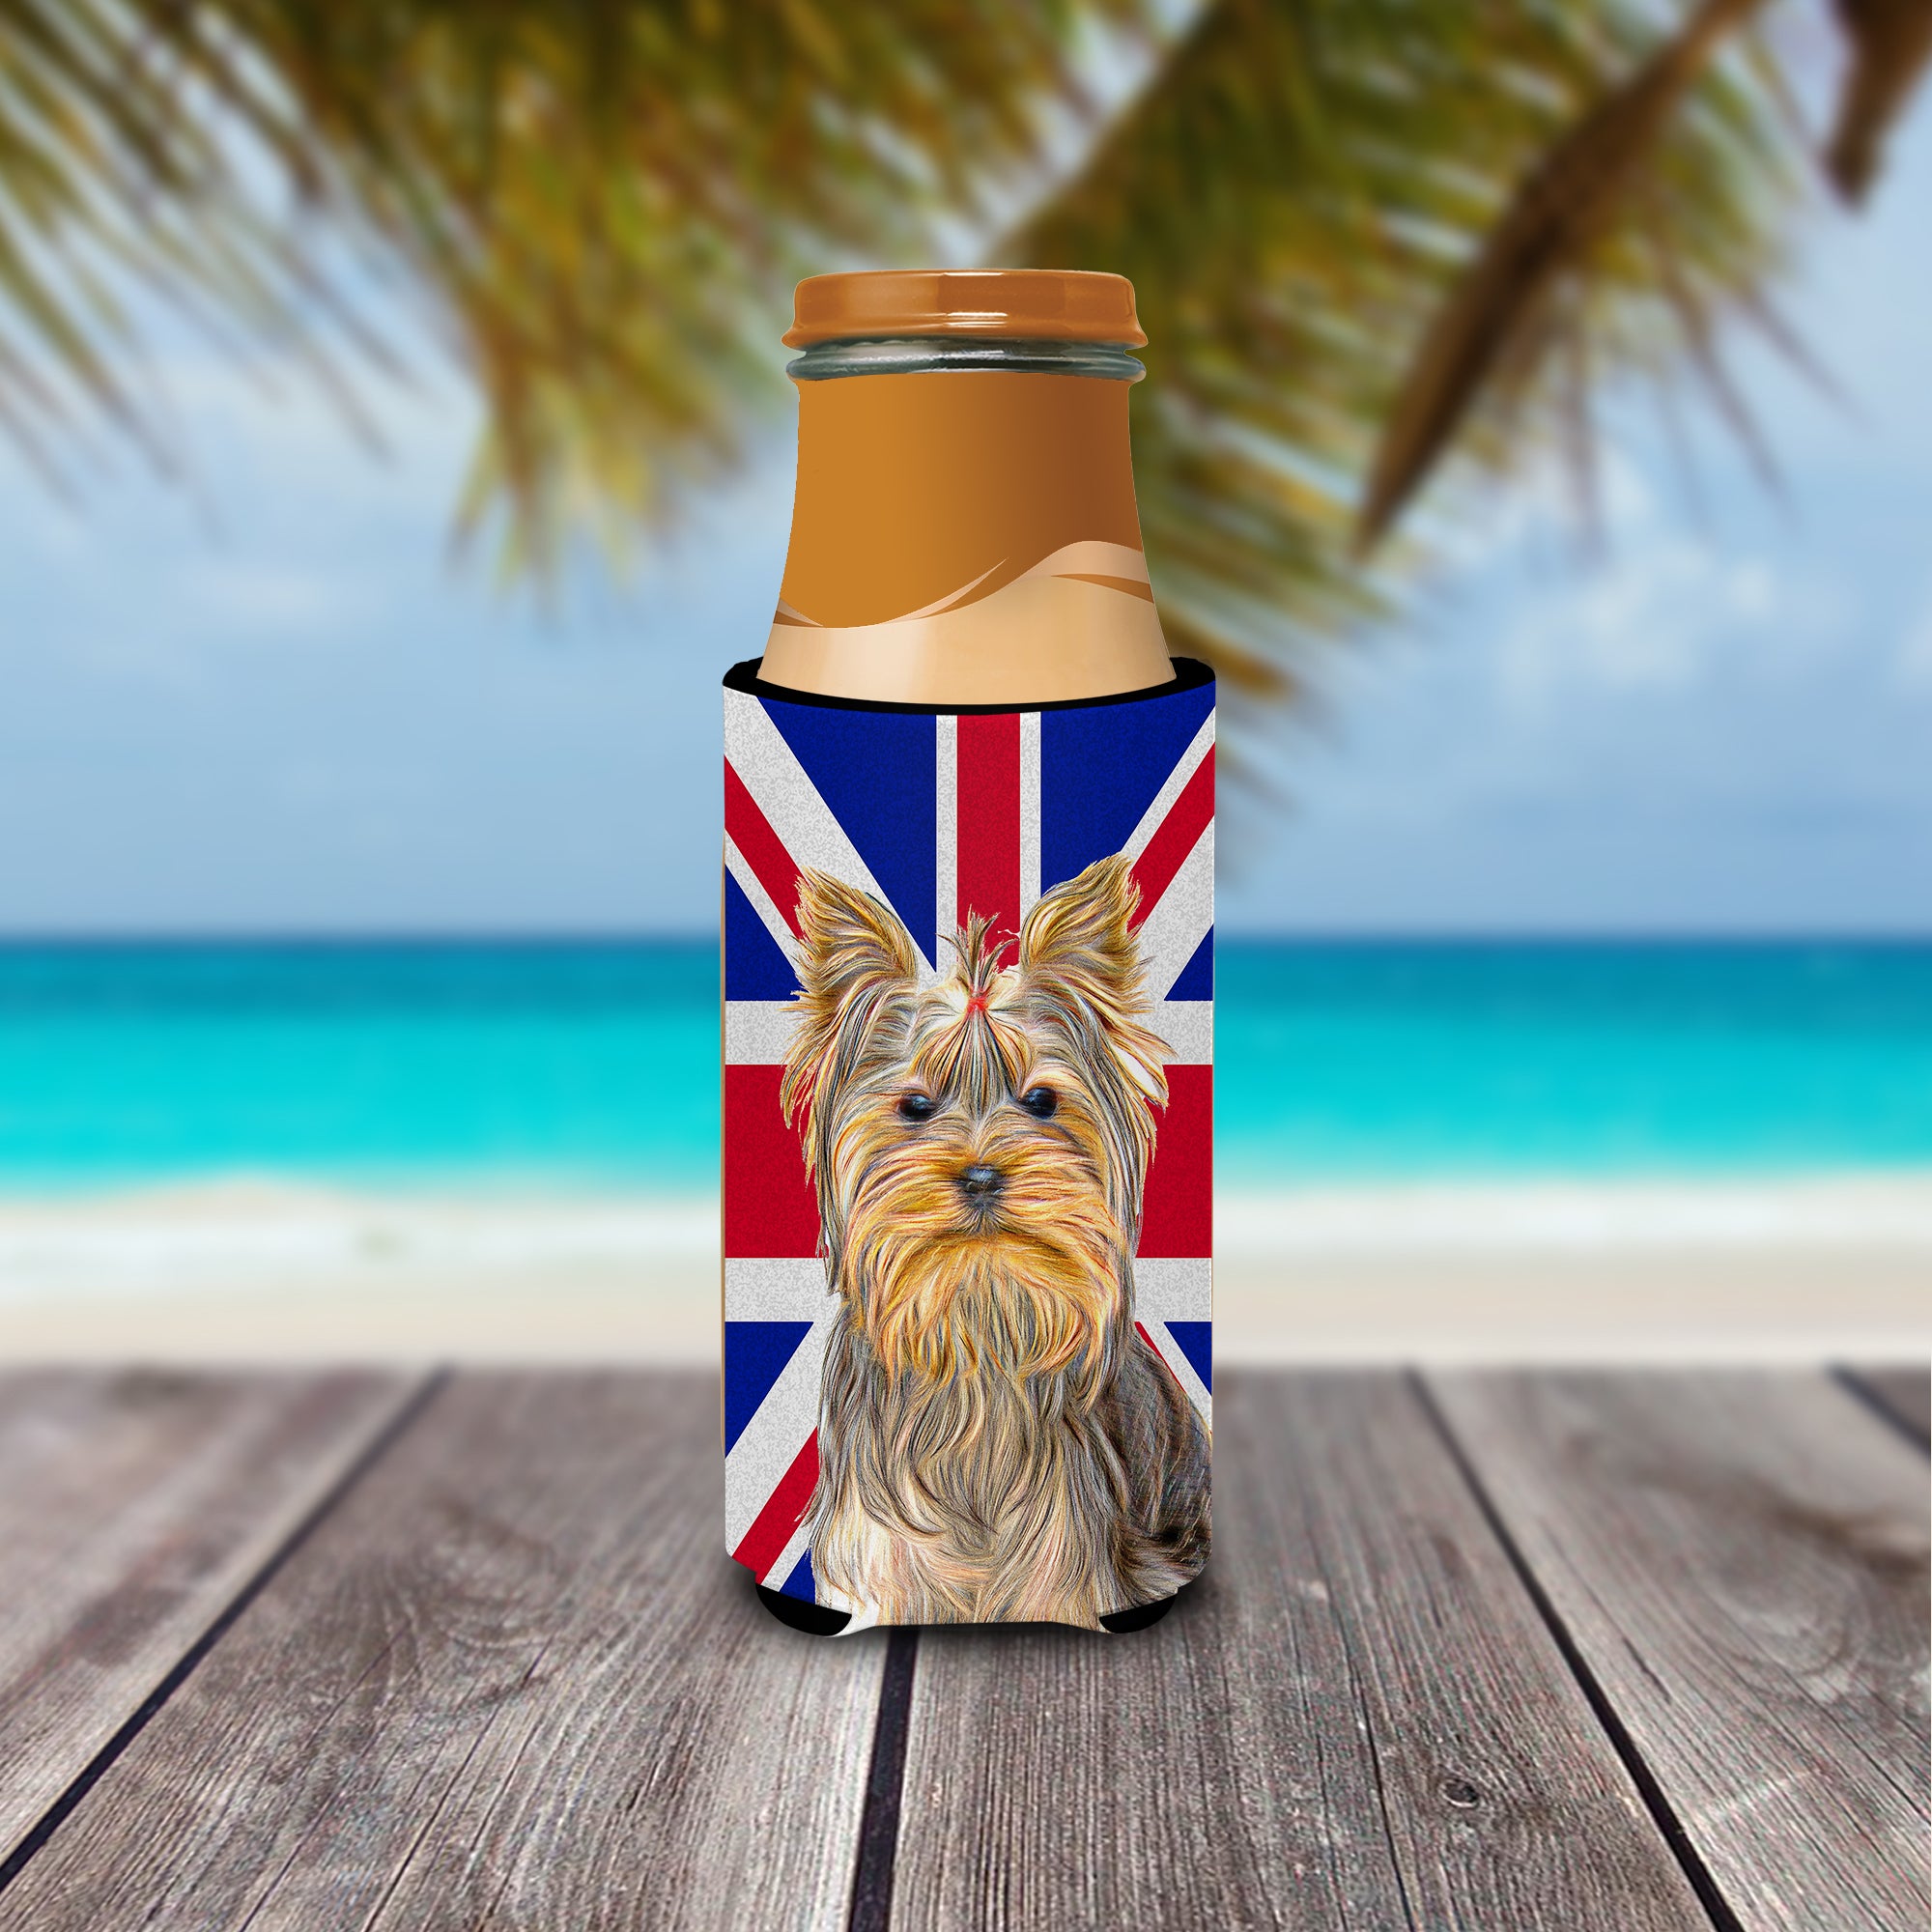 Yorkie / Yorkshire Terrier with English Union Jack British Flag Ultra Beverage Insulators for slim cans KJ1163MUK.